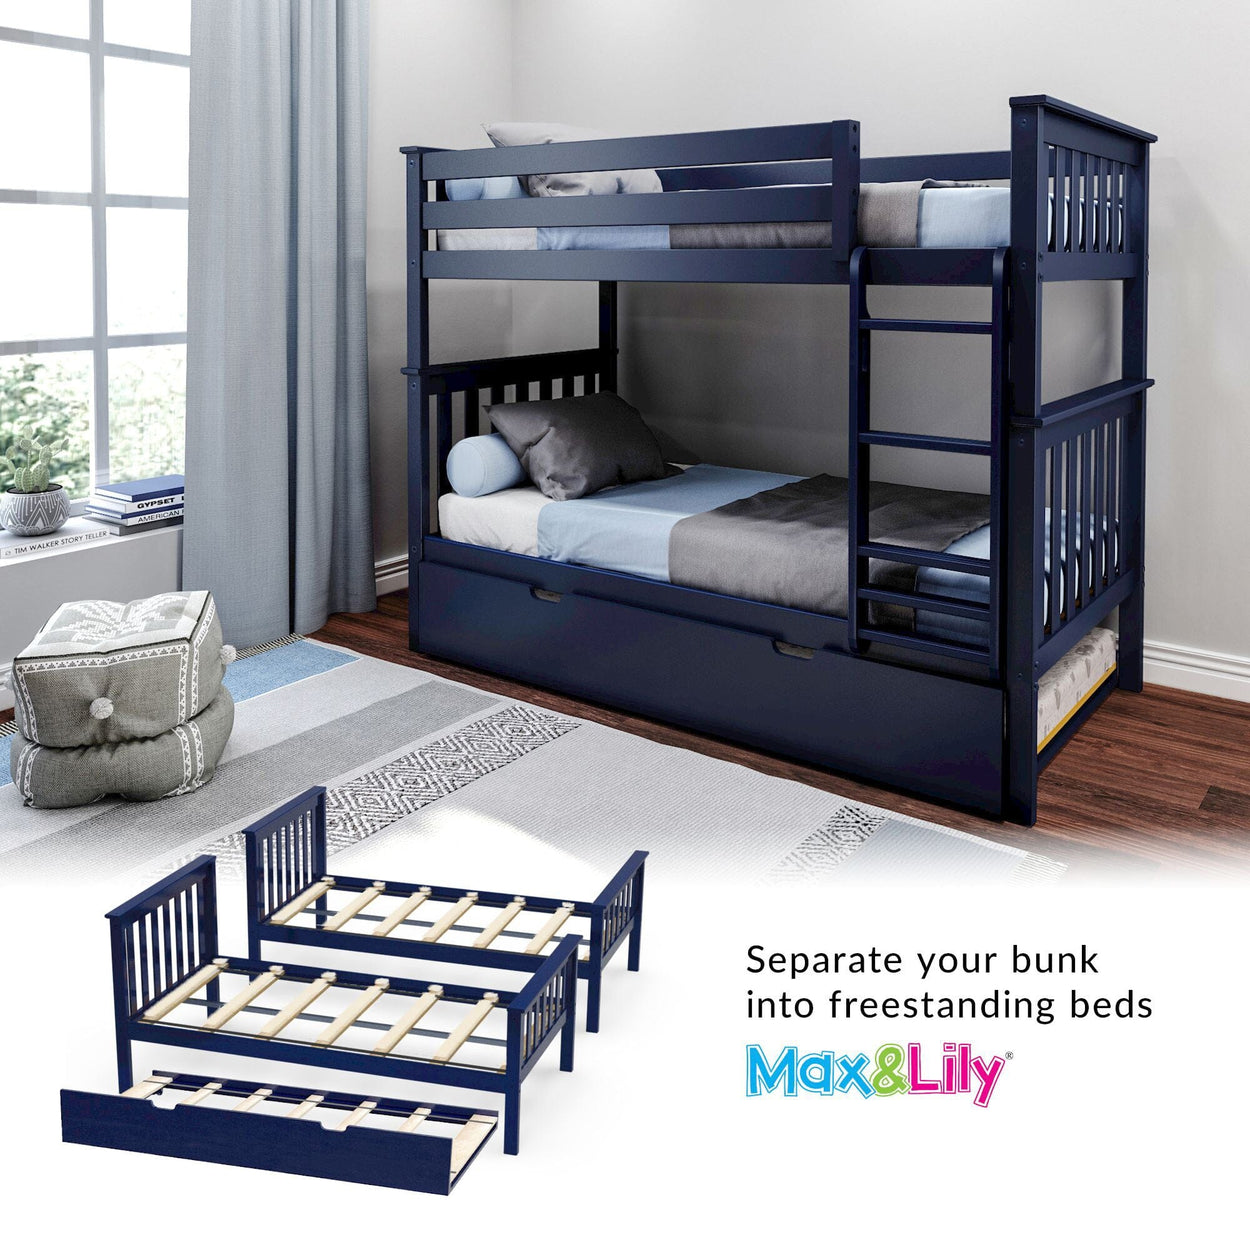 186201-131 : Bunk Beds Twin-Size Bunk Bed with Trundle, Blue